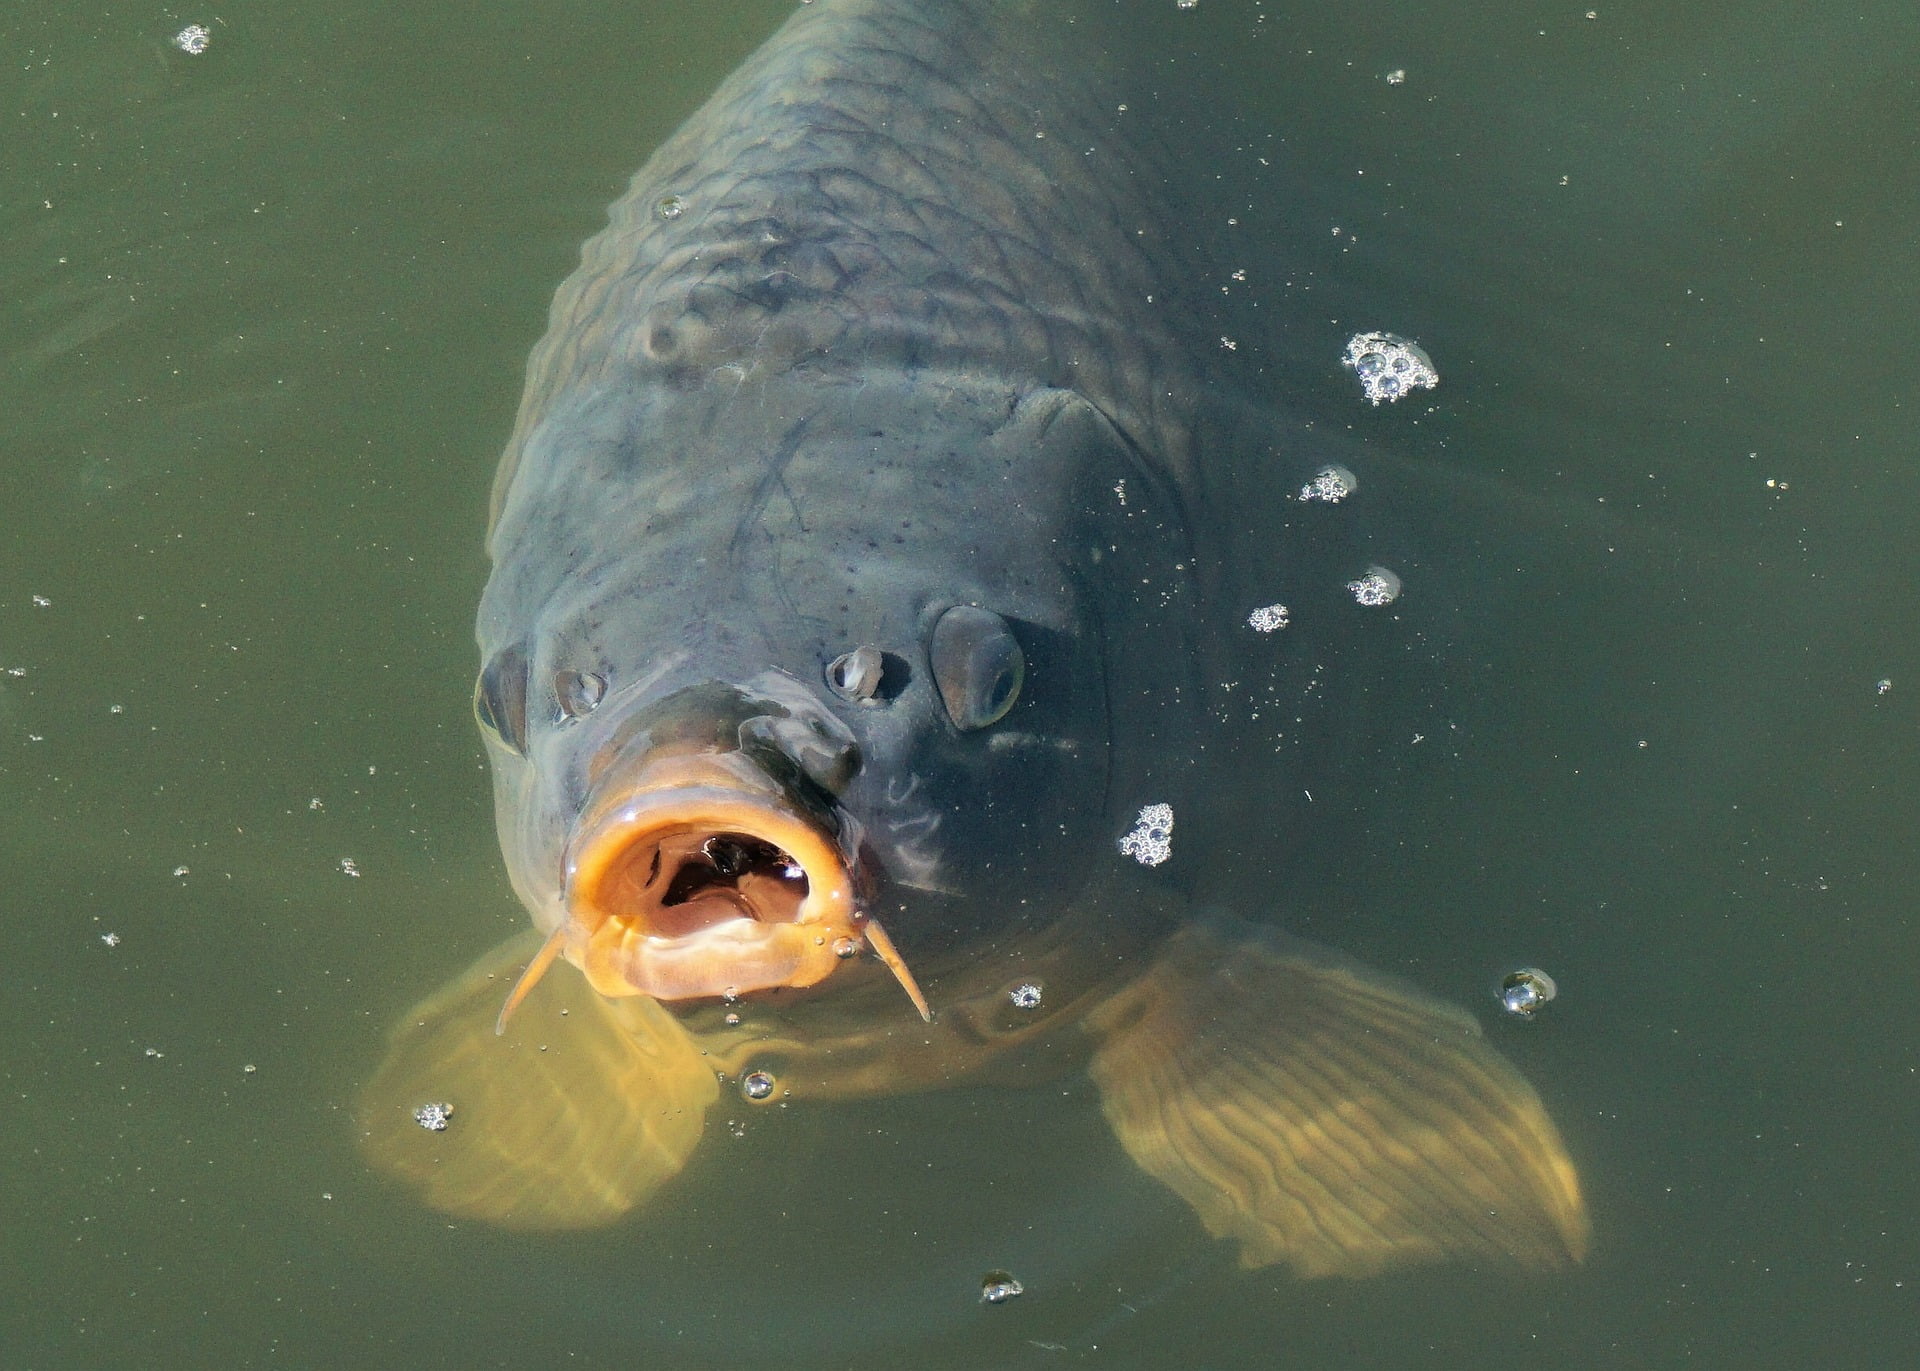 A very large carp breaks the surface of the water, fins visible just below the surface.